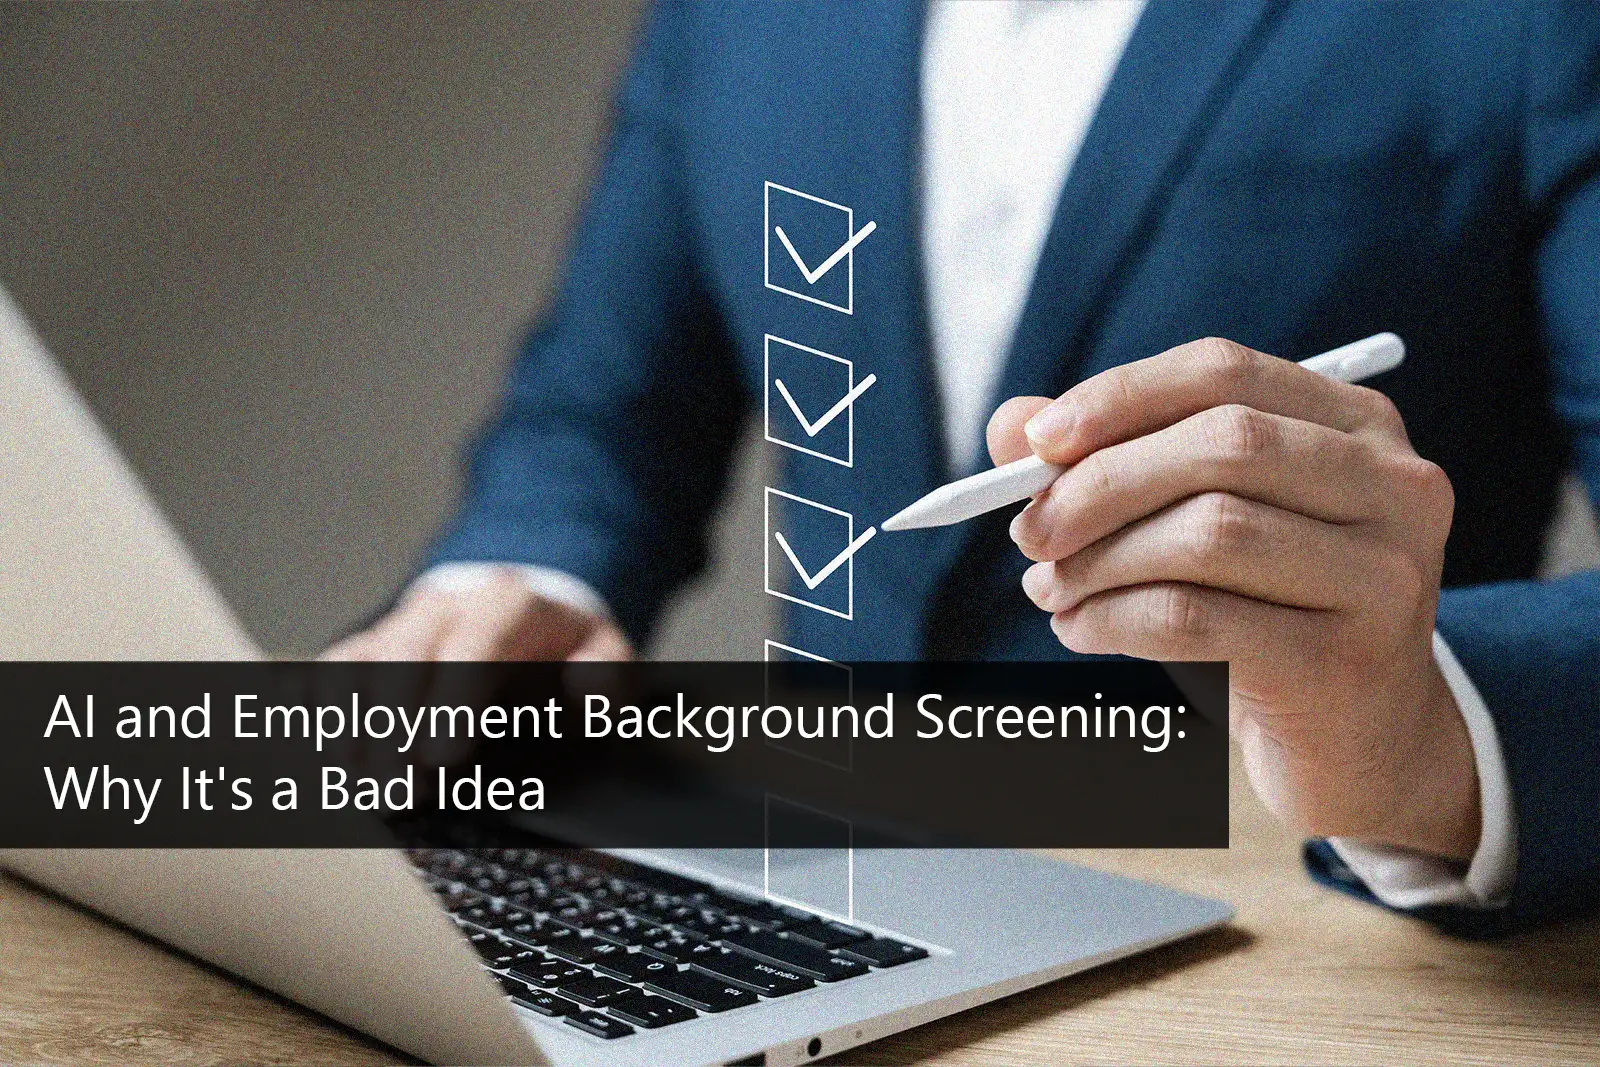 AI and Employment Background Screening: Why It's a Bad Idea